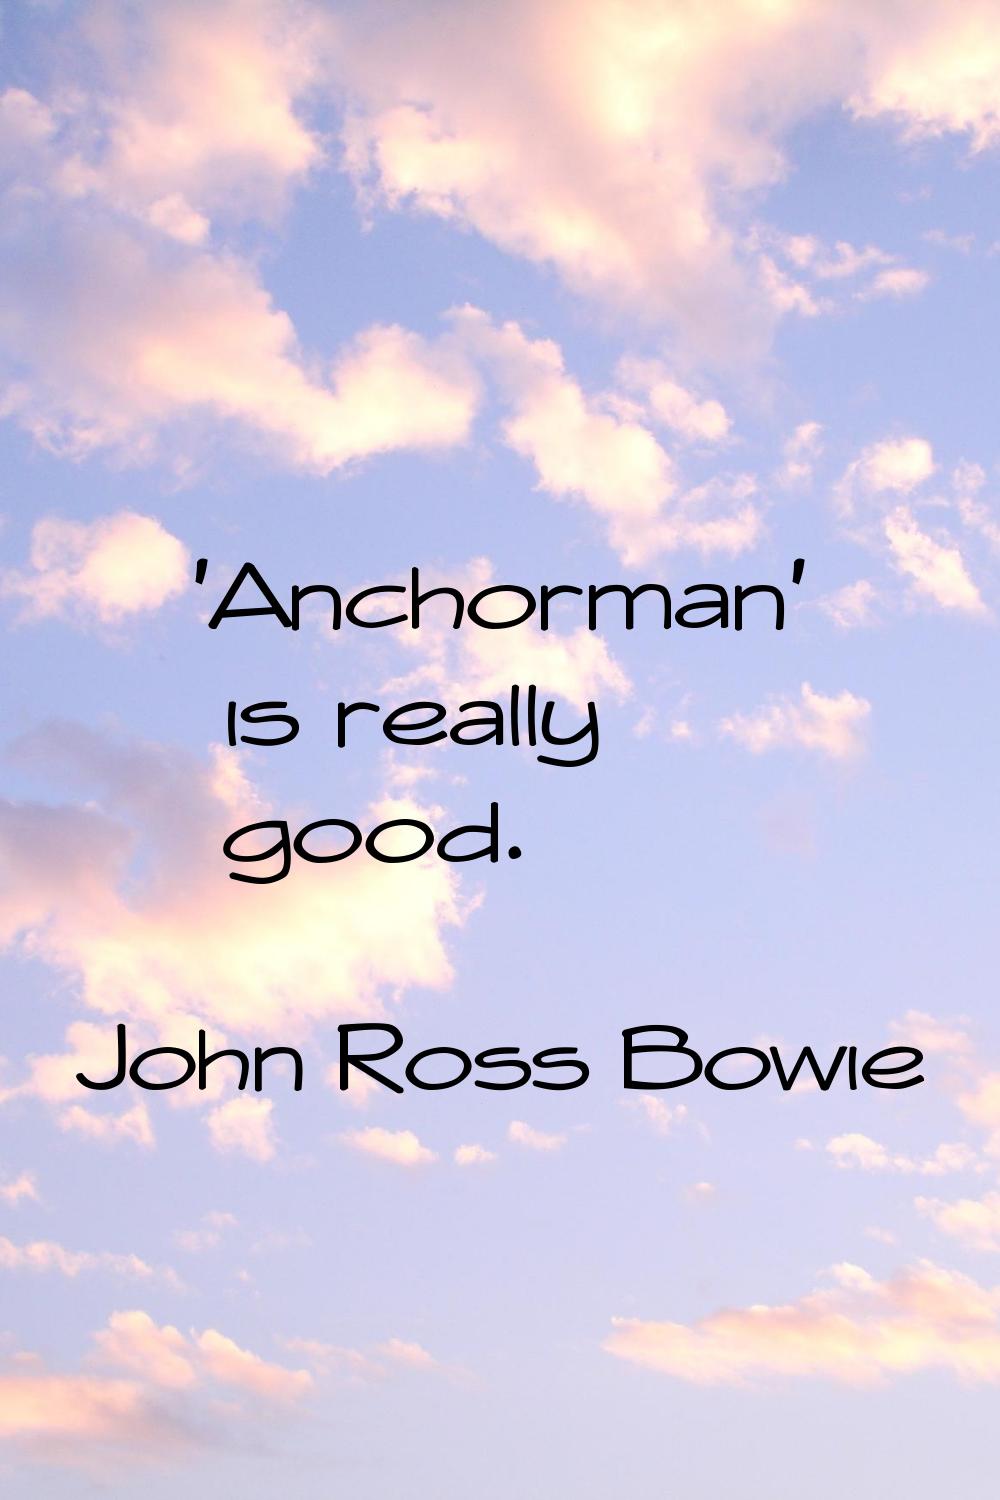 'Anchorman' is really good.